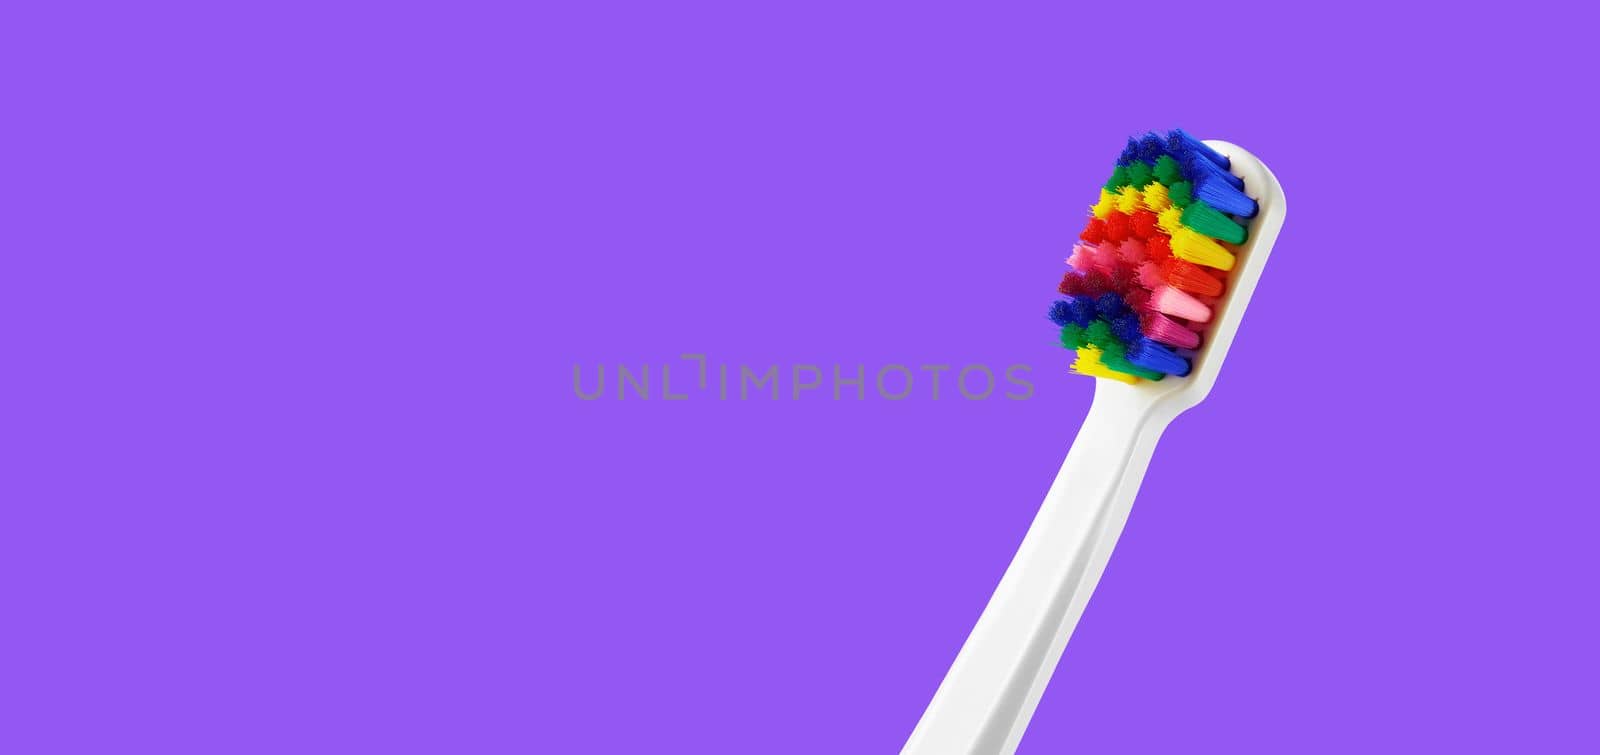 White toothbrush with multicolored bristles on royal purple background. Bristles in all colors of the rainbow. Rainbow toothbrush with white knob. Fashionable oral care by EvgeniyQW